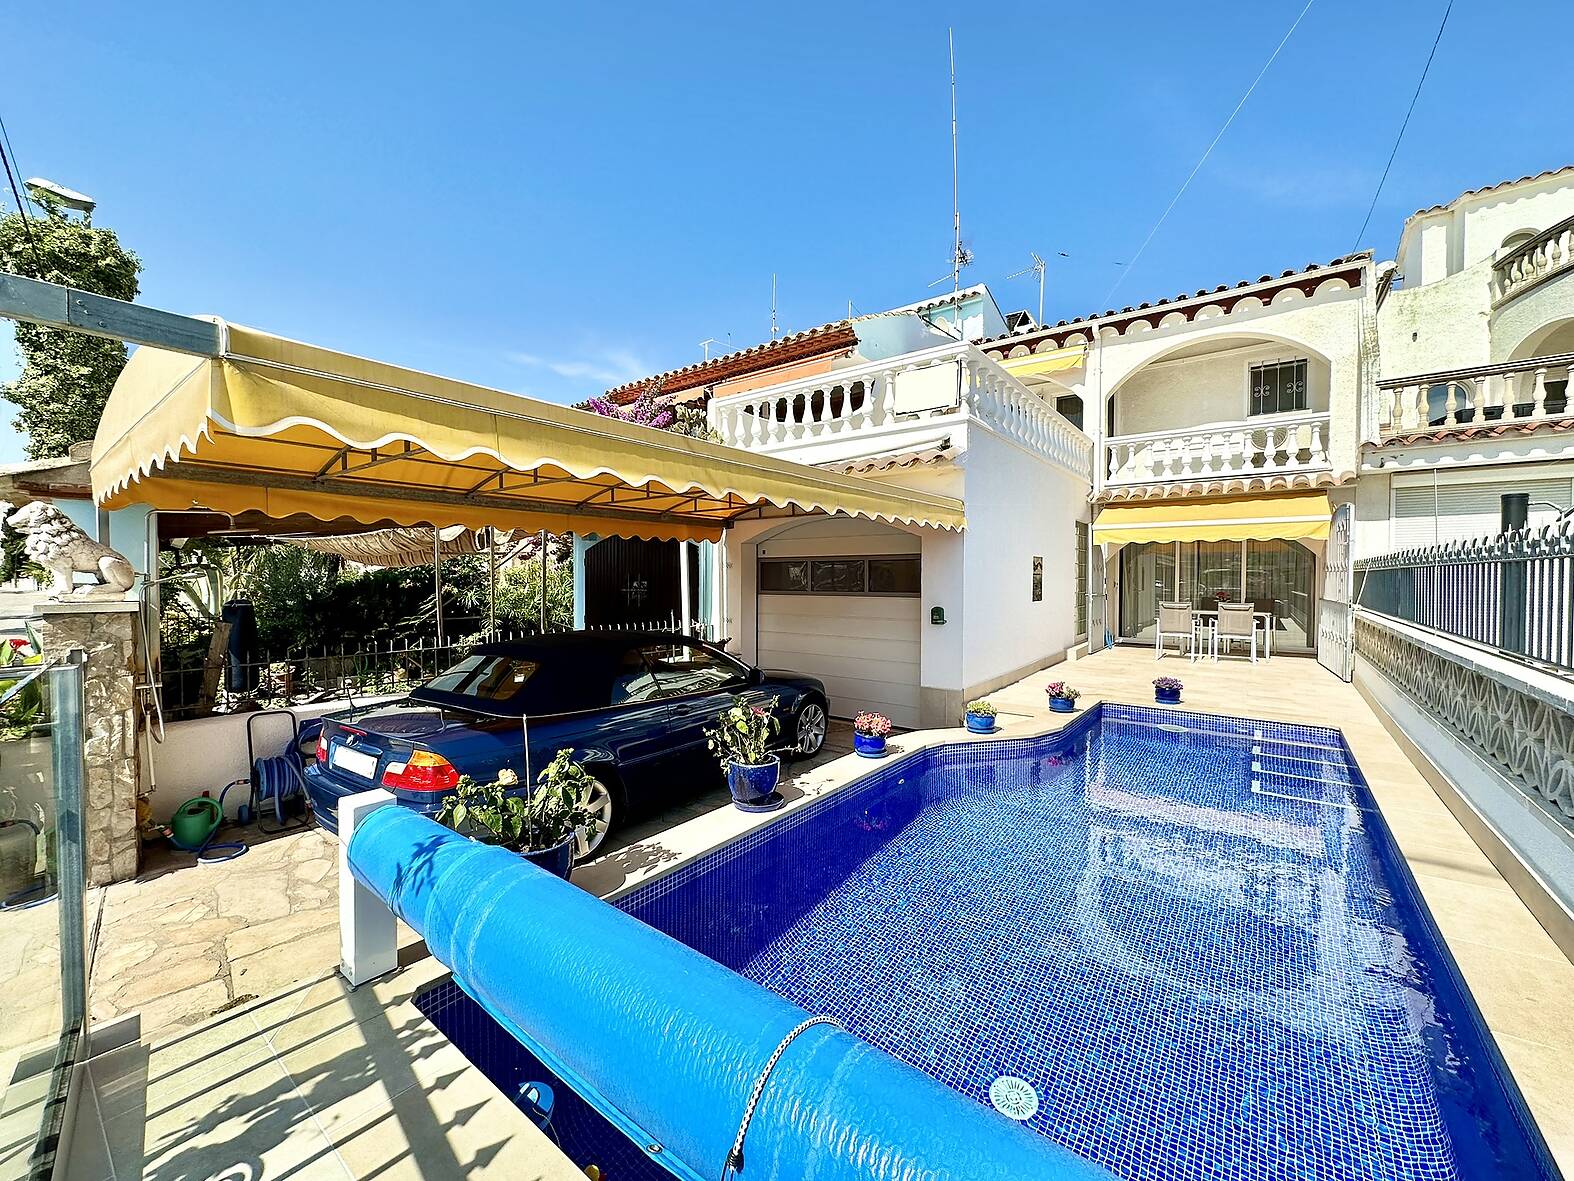 Magnificent house with mooring before the bridges in Empuriabrava.